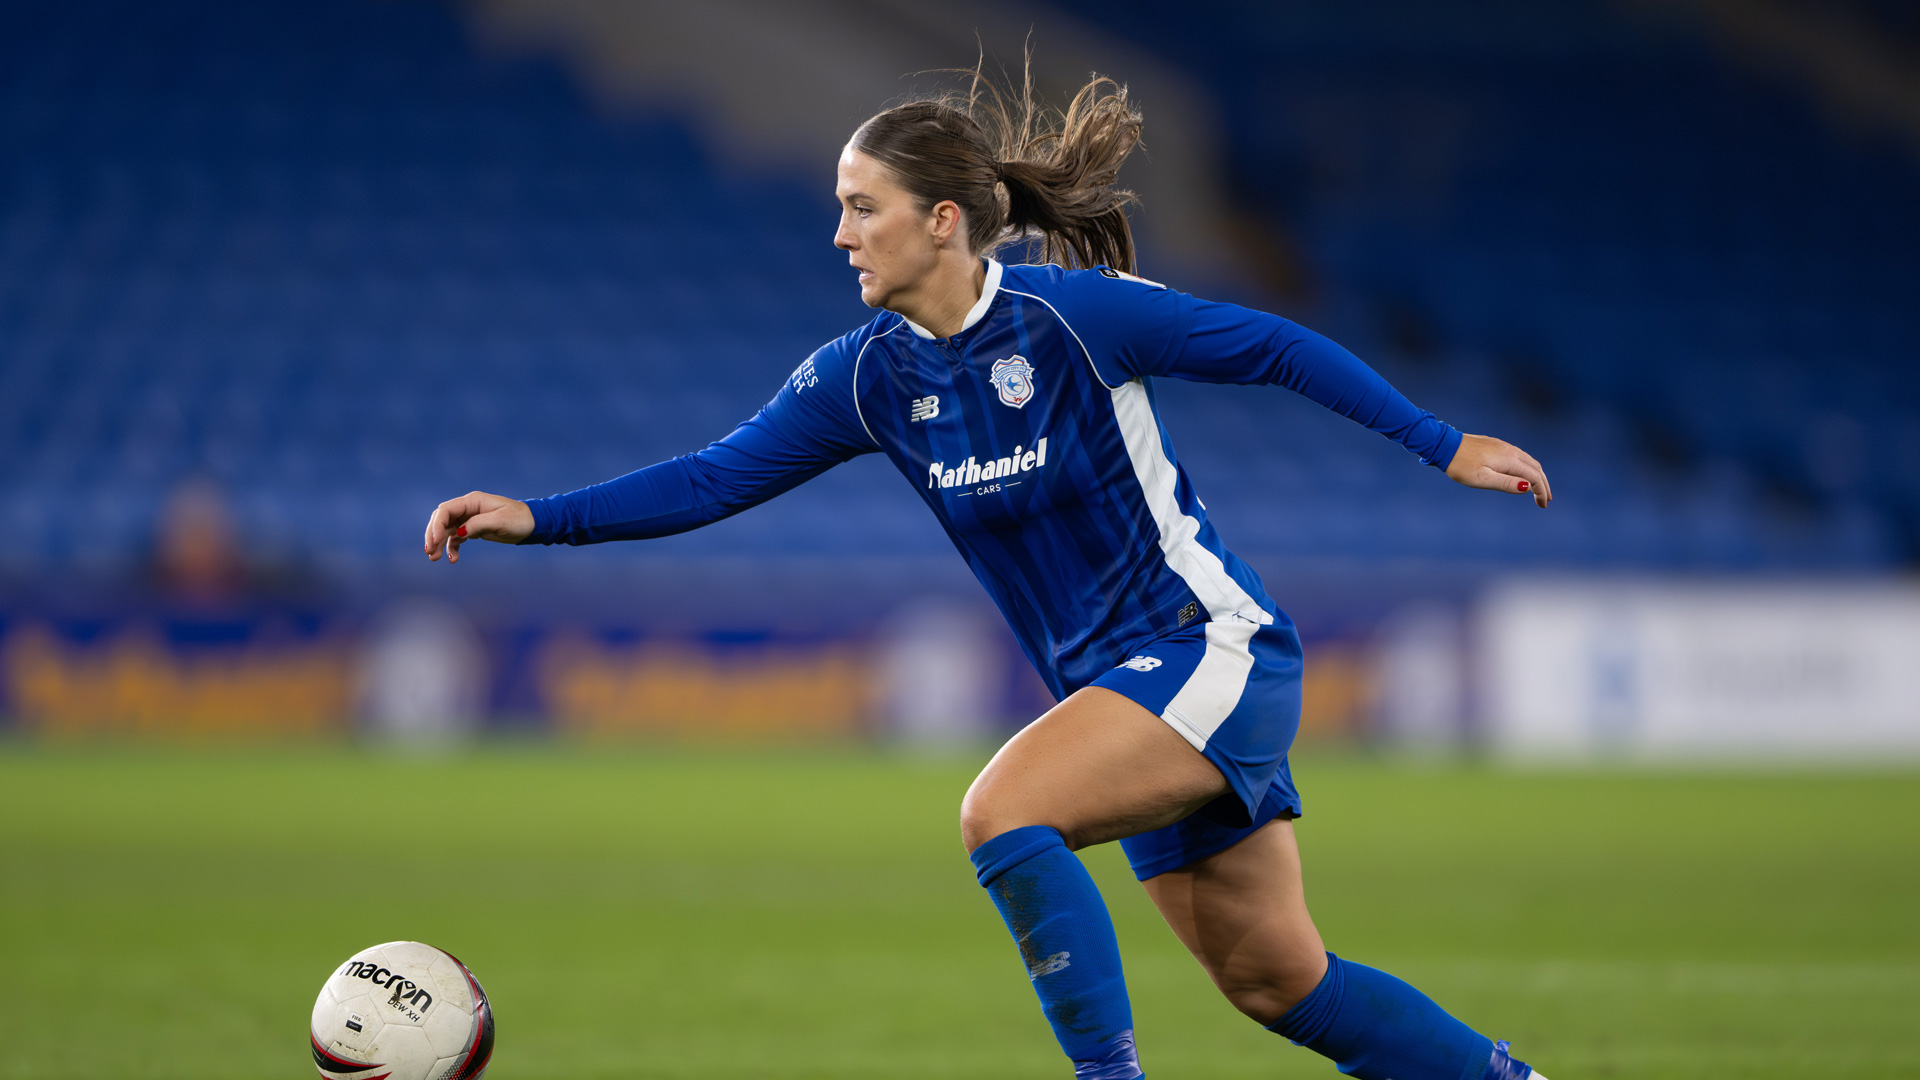 Emma Beynon in action for Cardiff City Women